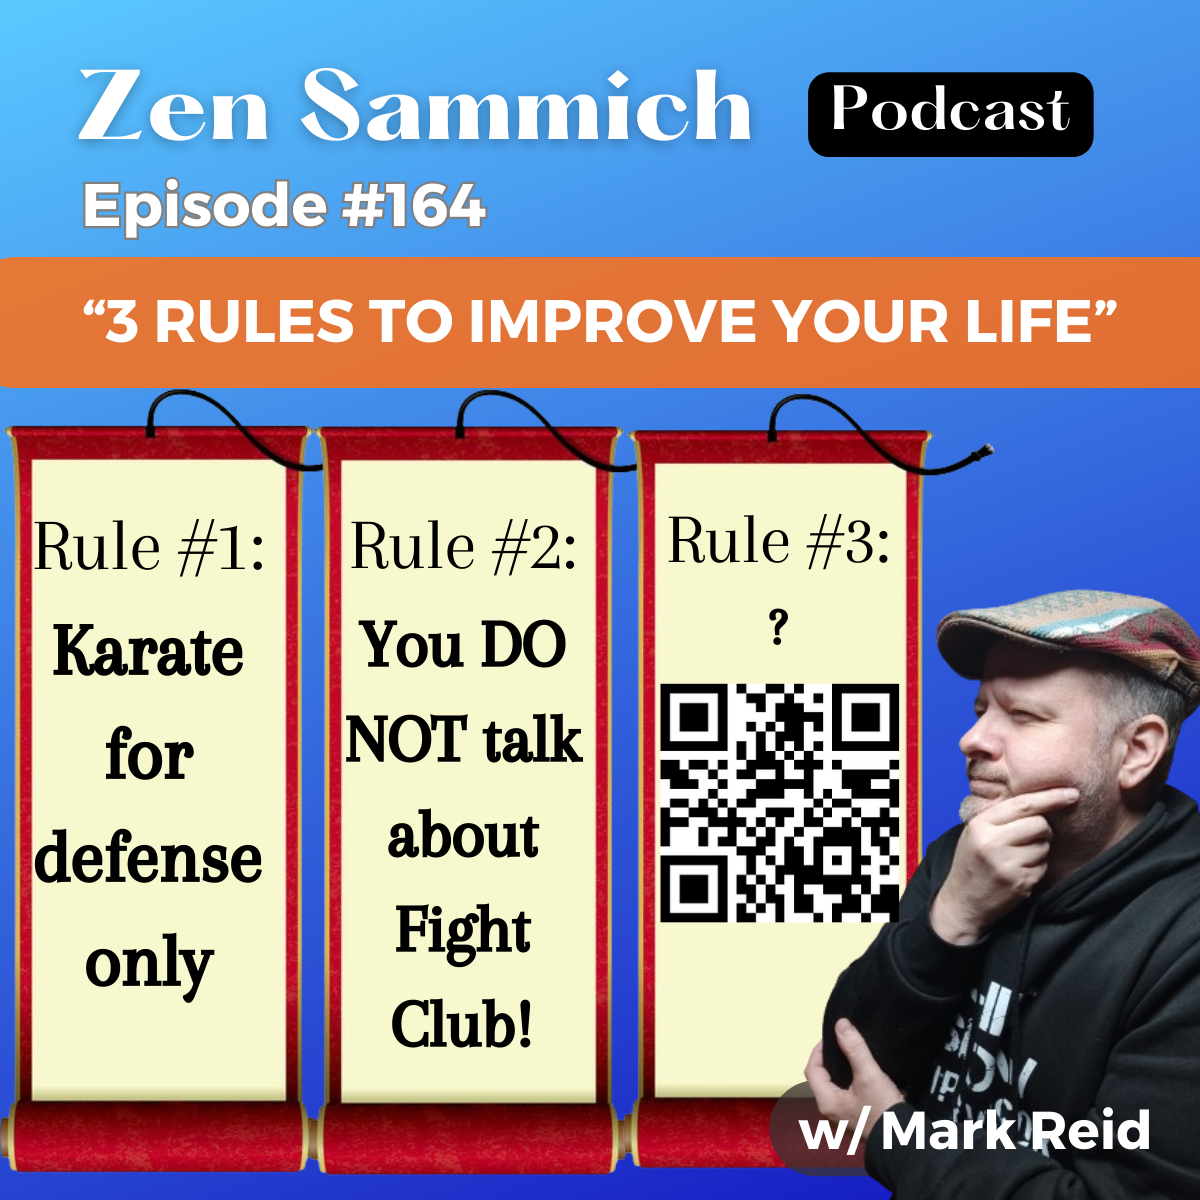 3 Rules for life zen sammich